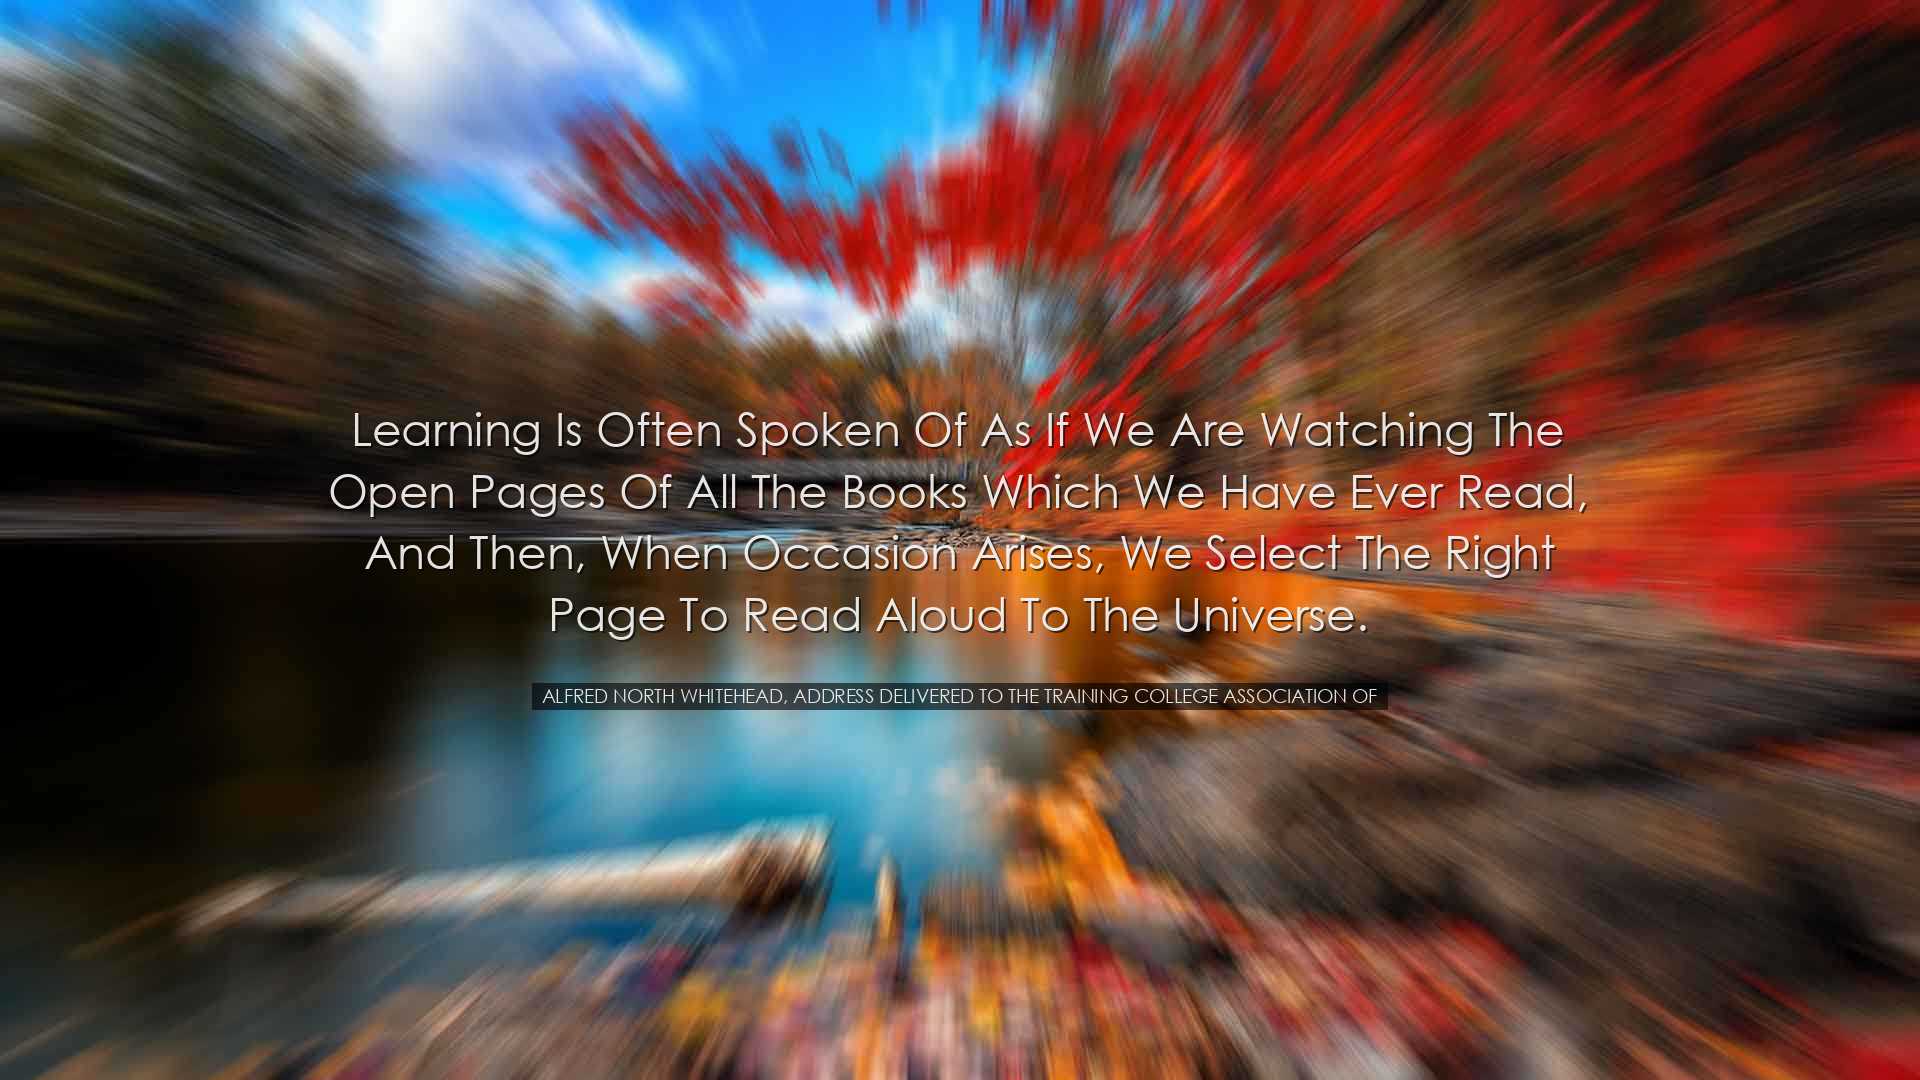 Learning is often spoken of as if we are watching the open pages o